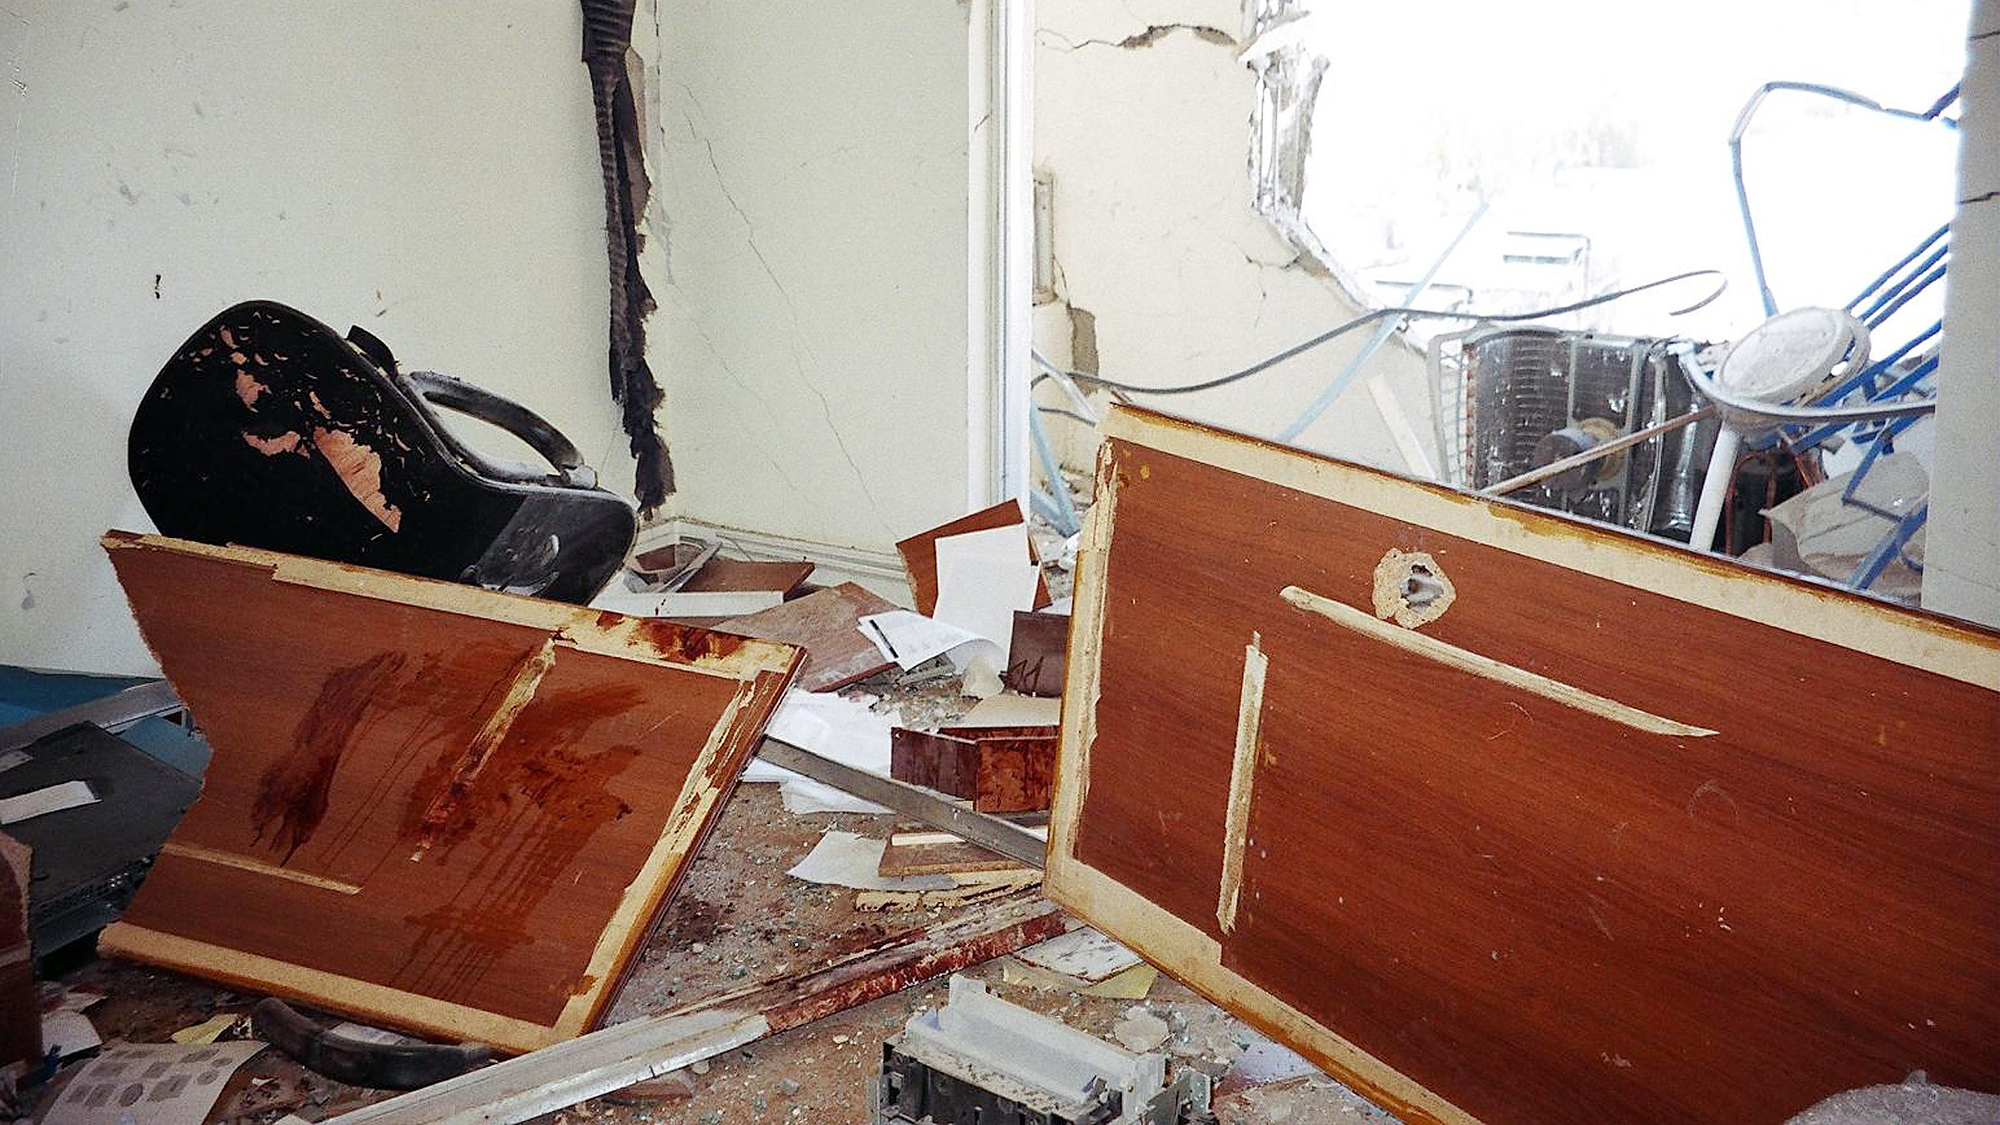 A partial view of the offices inside the United Nations headquarters in Baghdad, that was destroyed by a truck bomb on August 19, 2003.